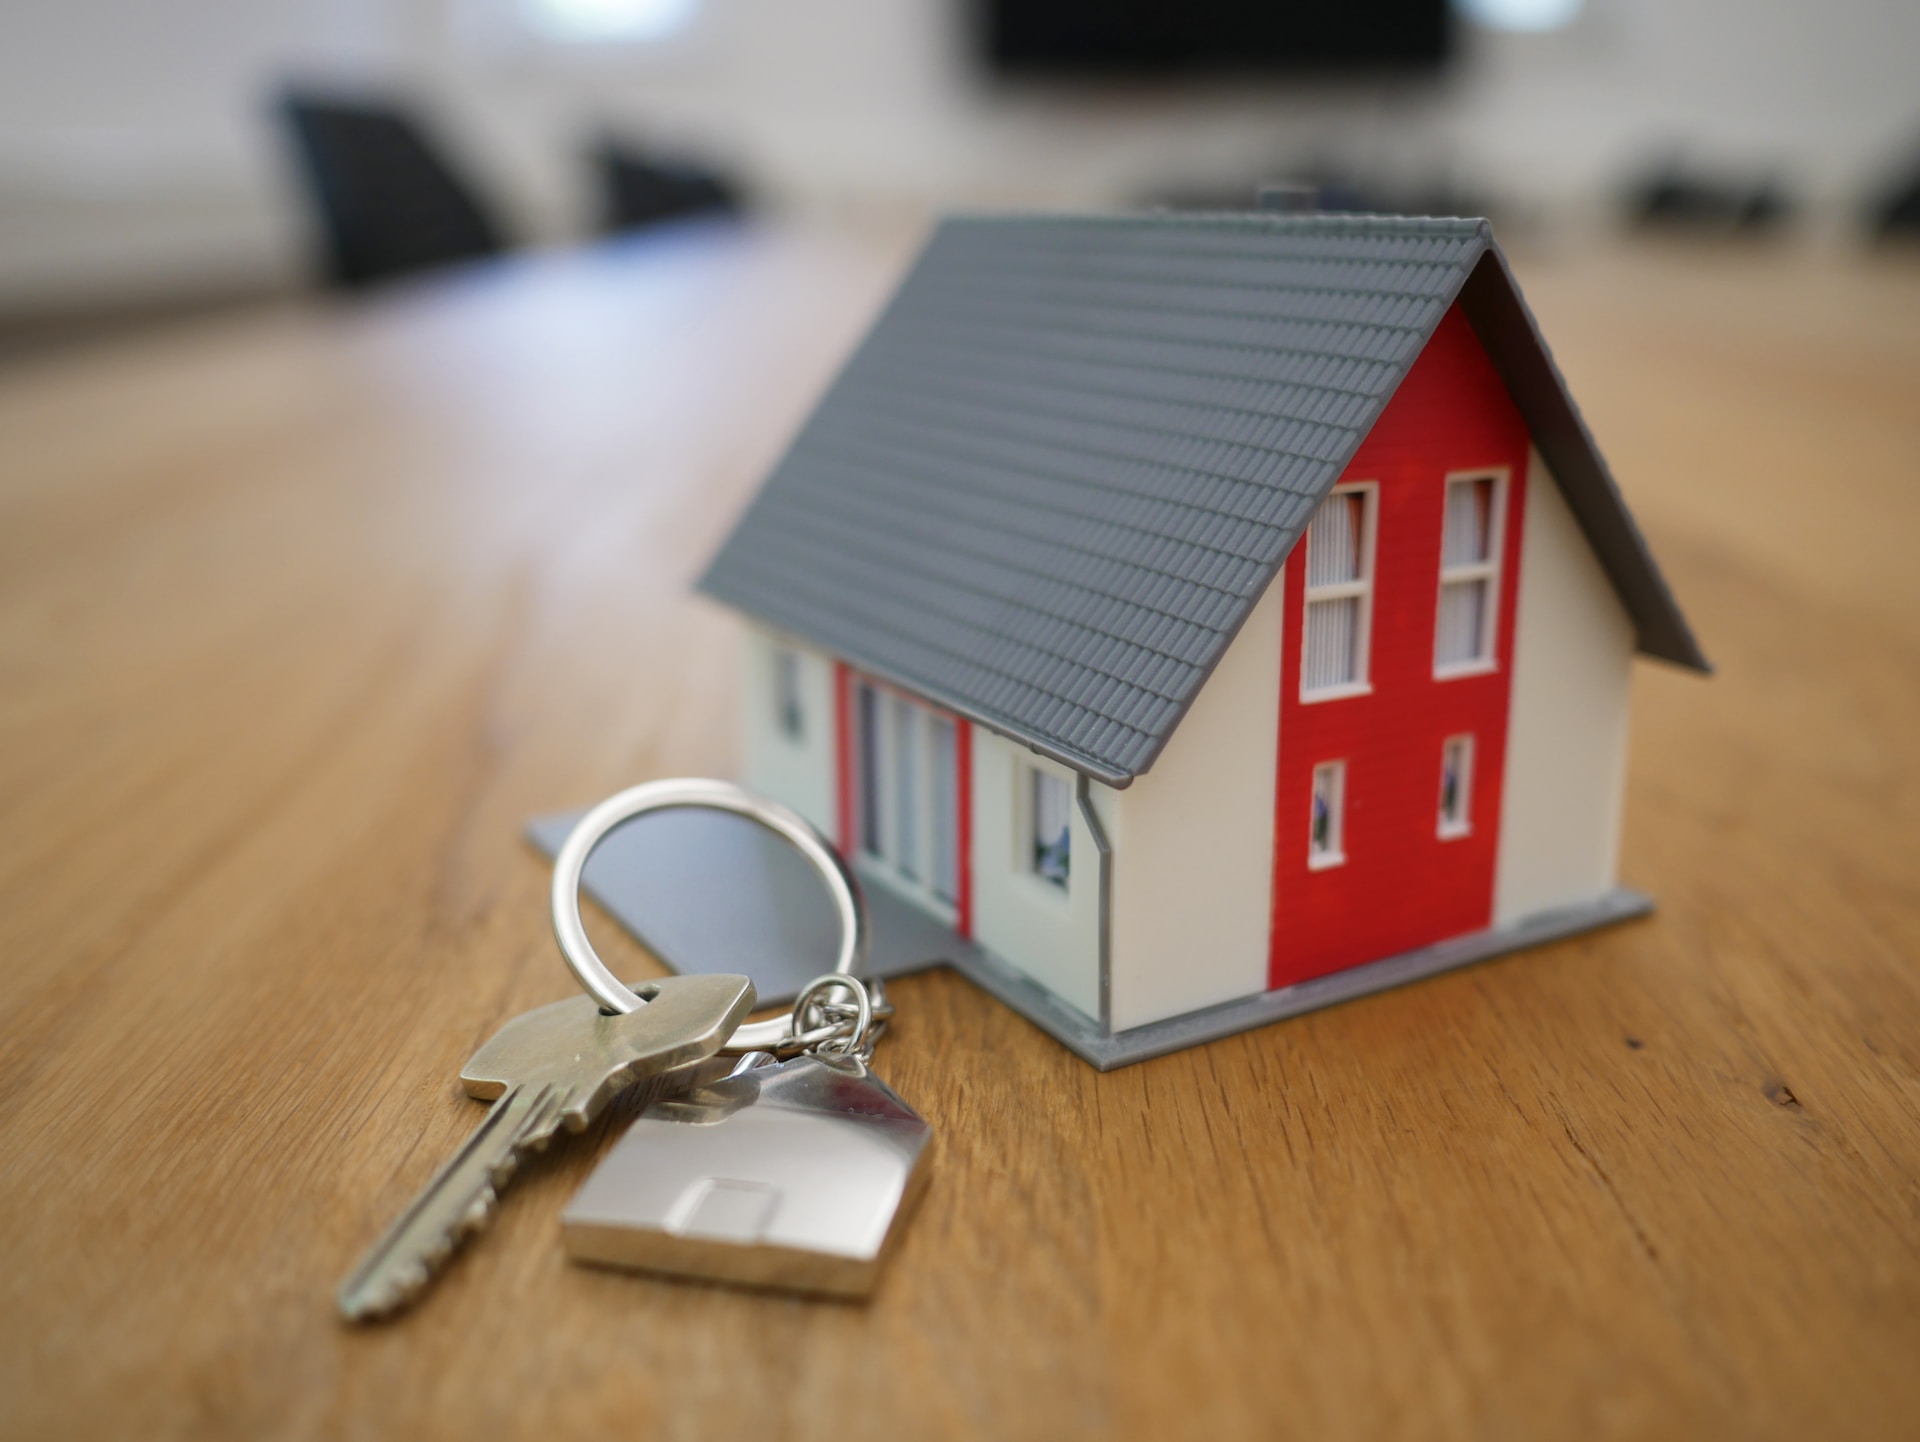 Small model of home on table with house keys